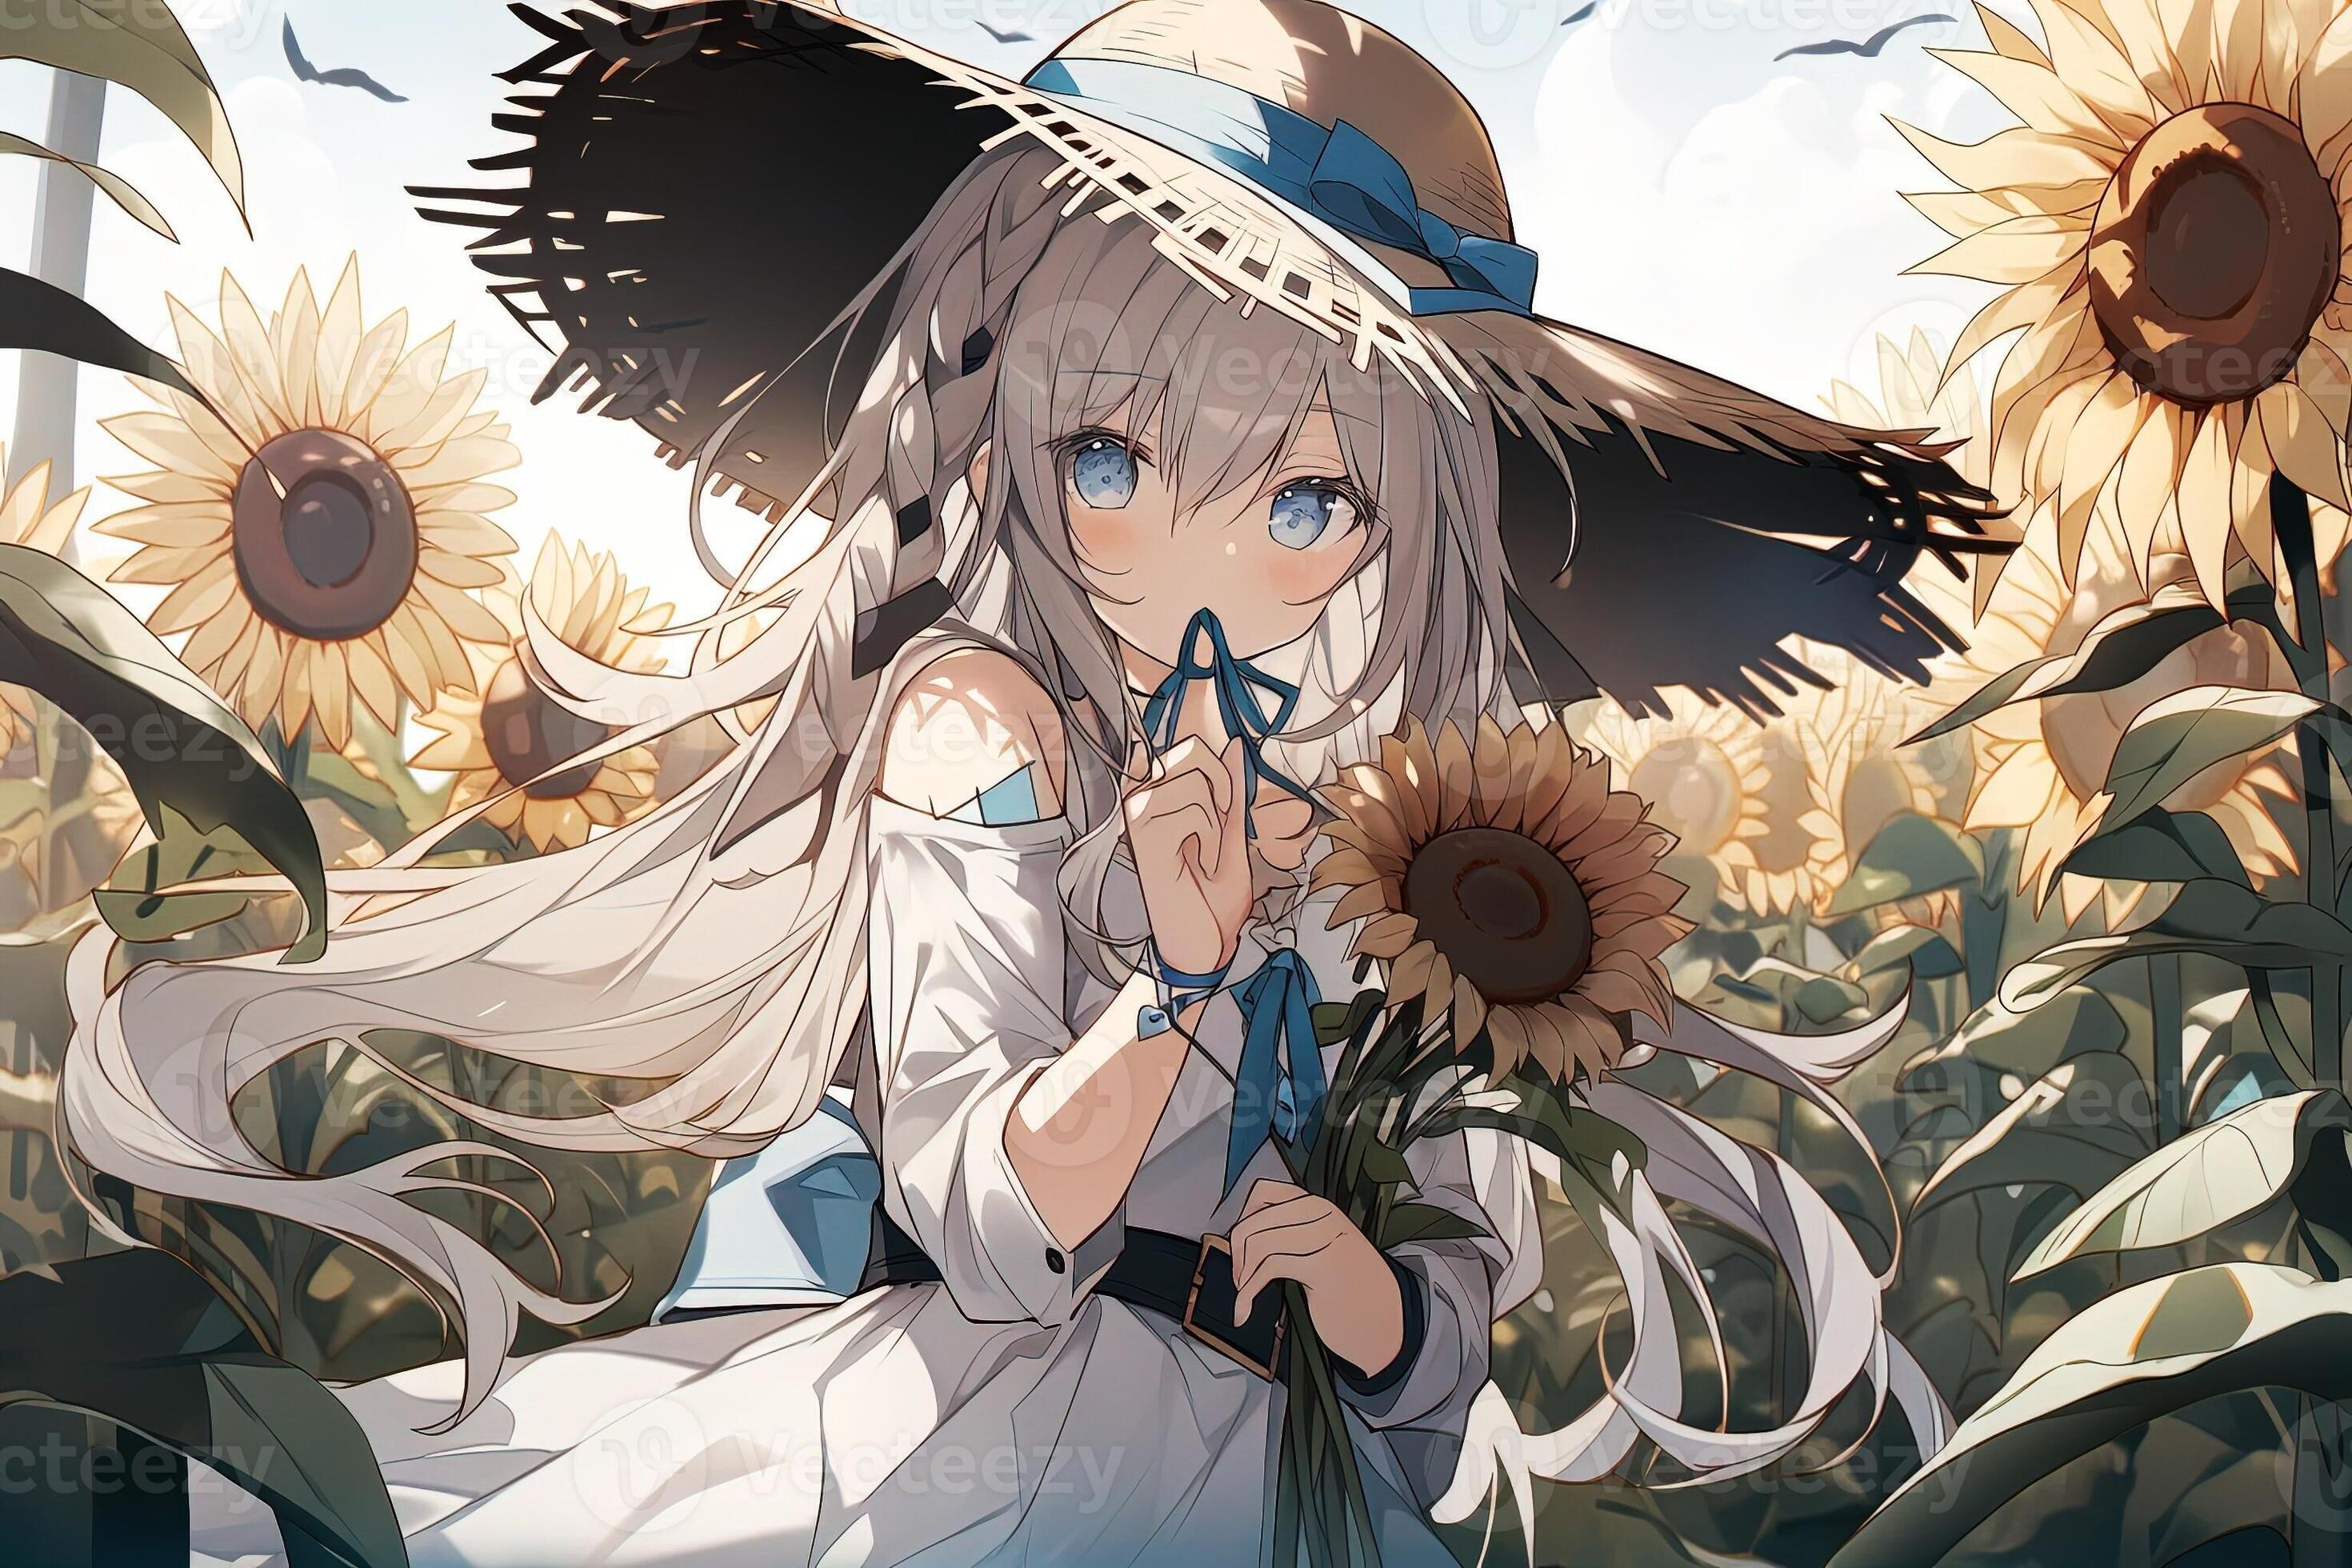 https://static.vecteezy.com/system/resources/previews/022/385/026/large_2x/cute-blond-anime-girl-in-a-big-straw-hat-holding-a-sunflower-in-a-sunflower-field-generated-ai-photo.jpg